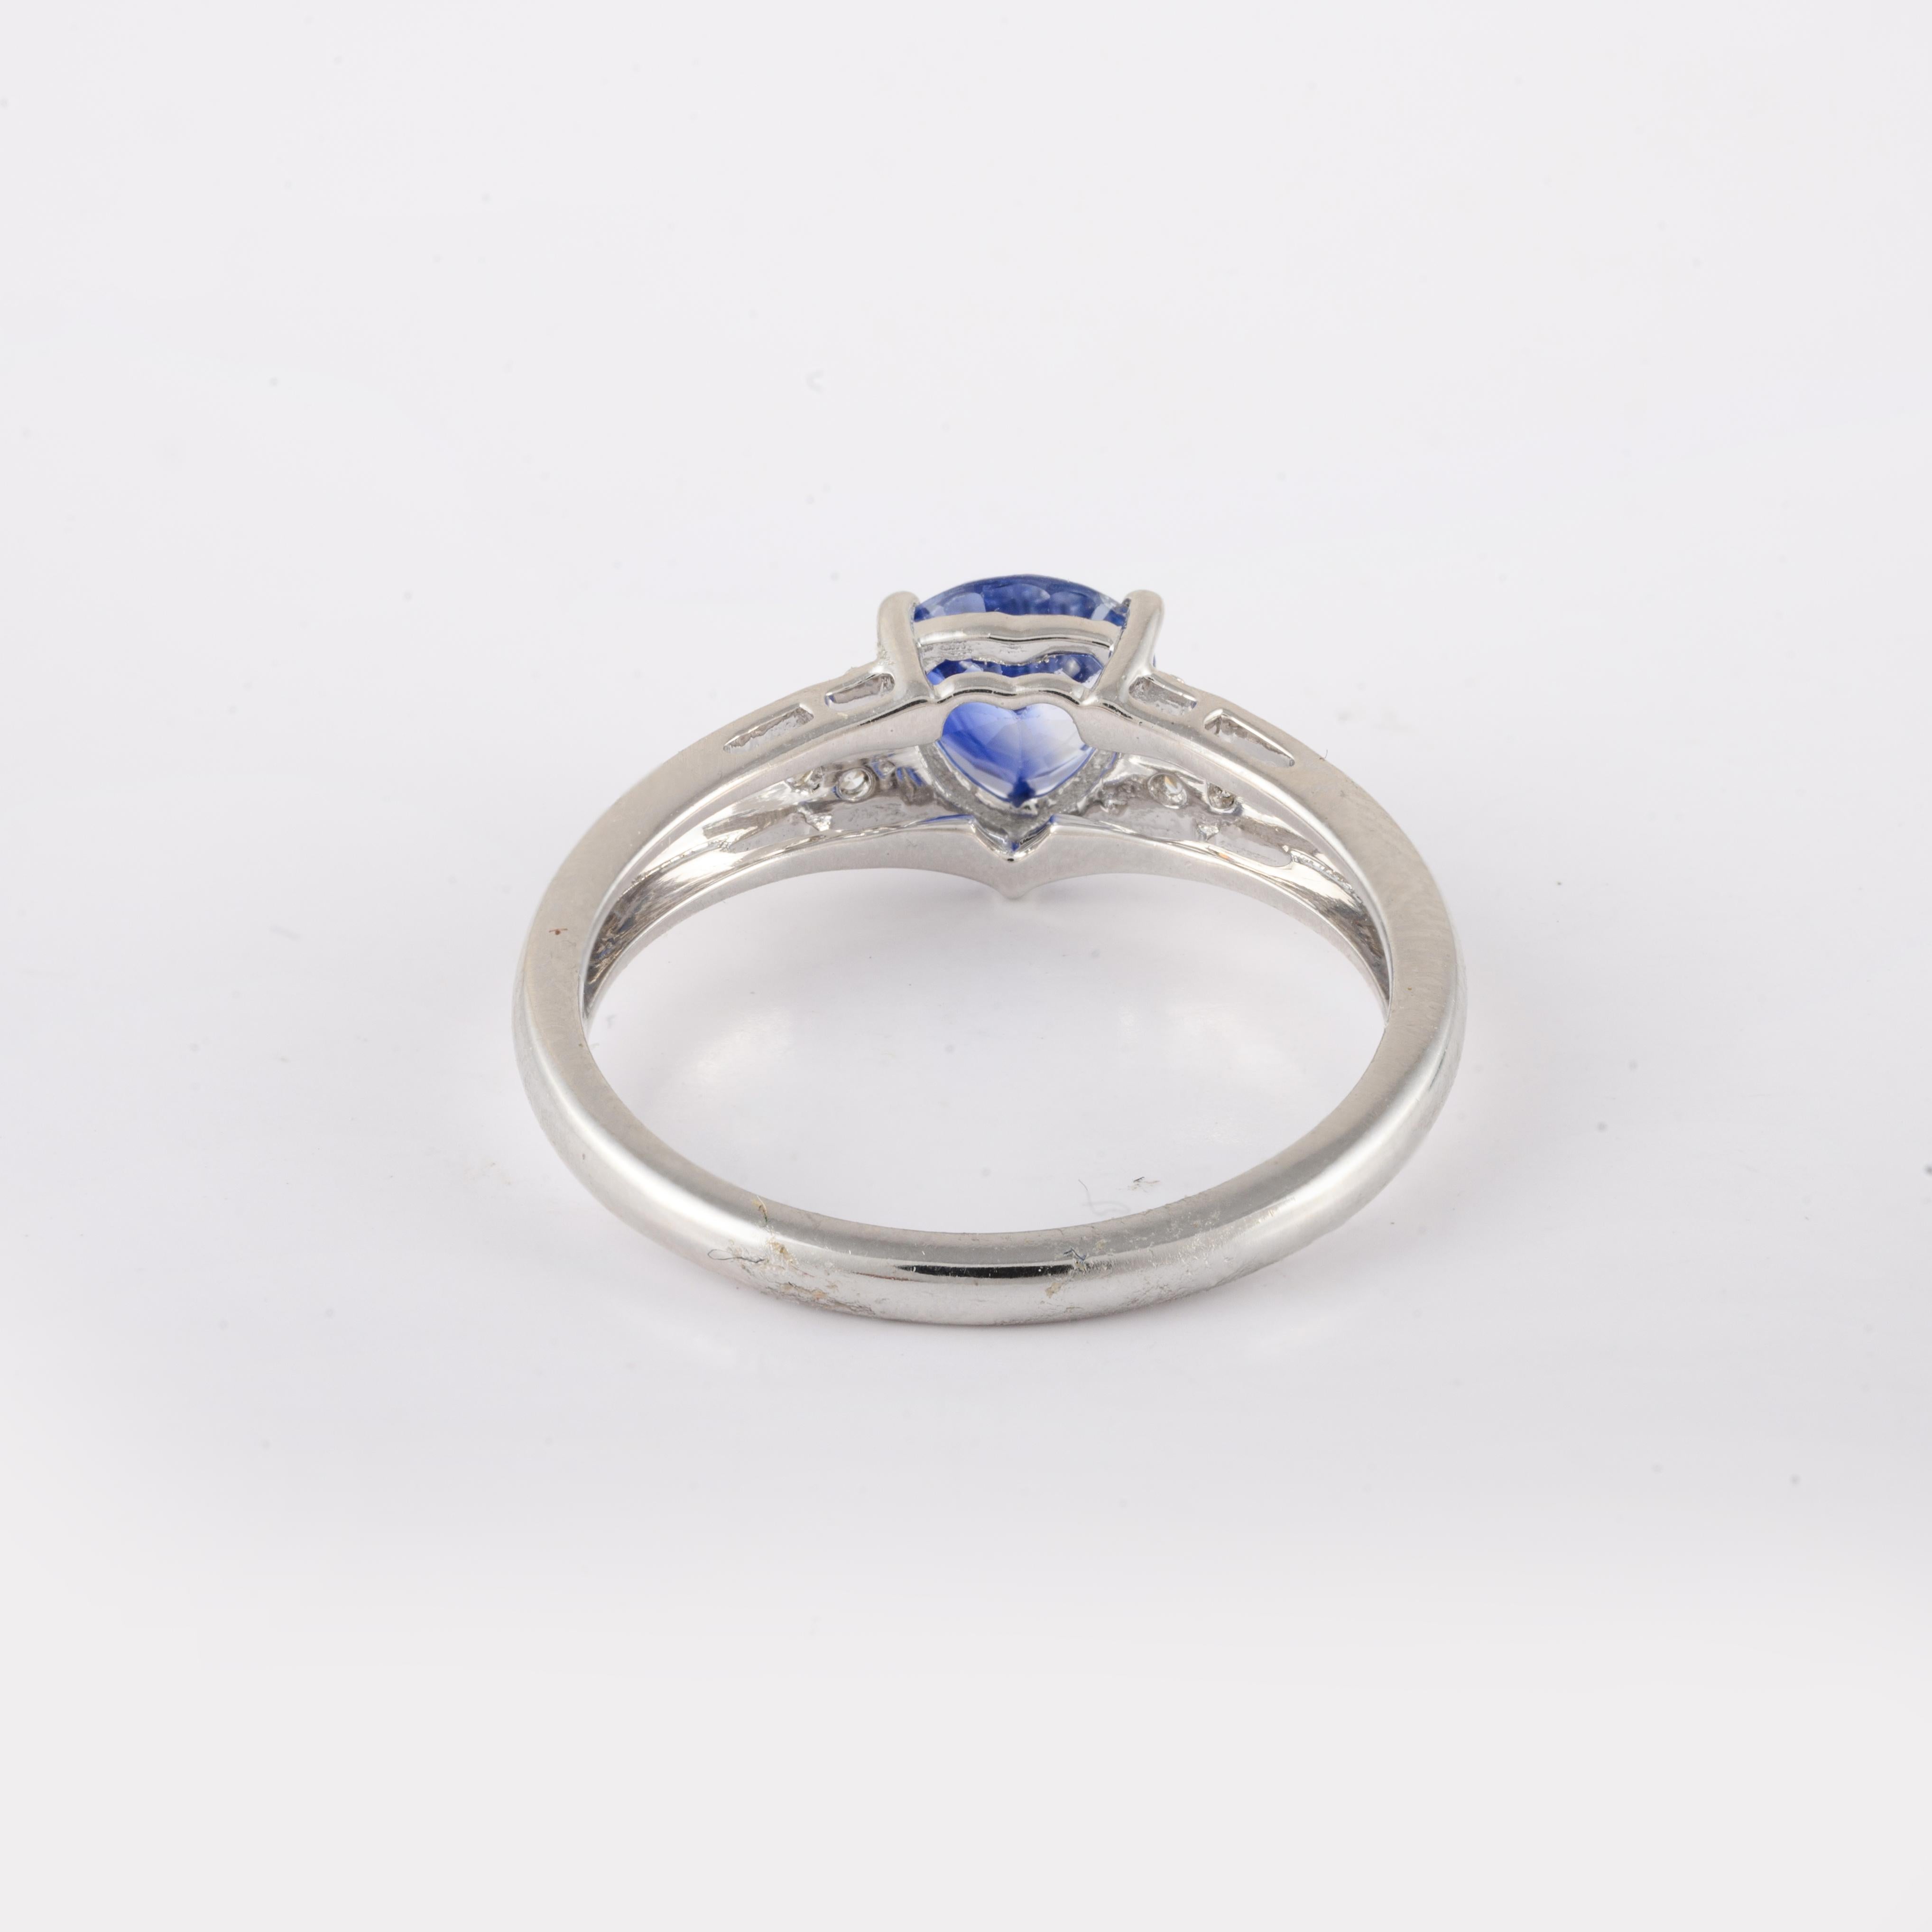 For Sale:  14k White Gold Trillion Cut Sapphire Birthstone Engagement Ring with Diamonds 6